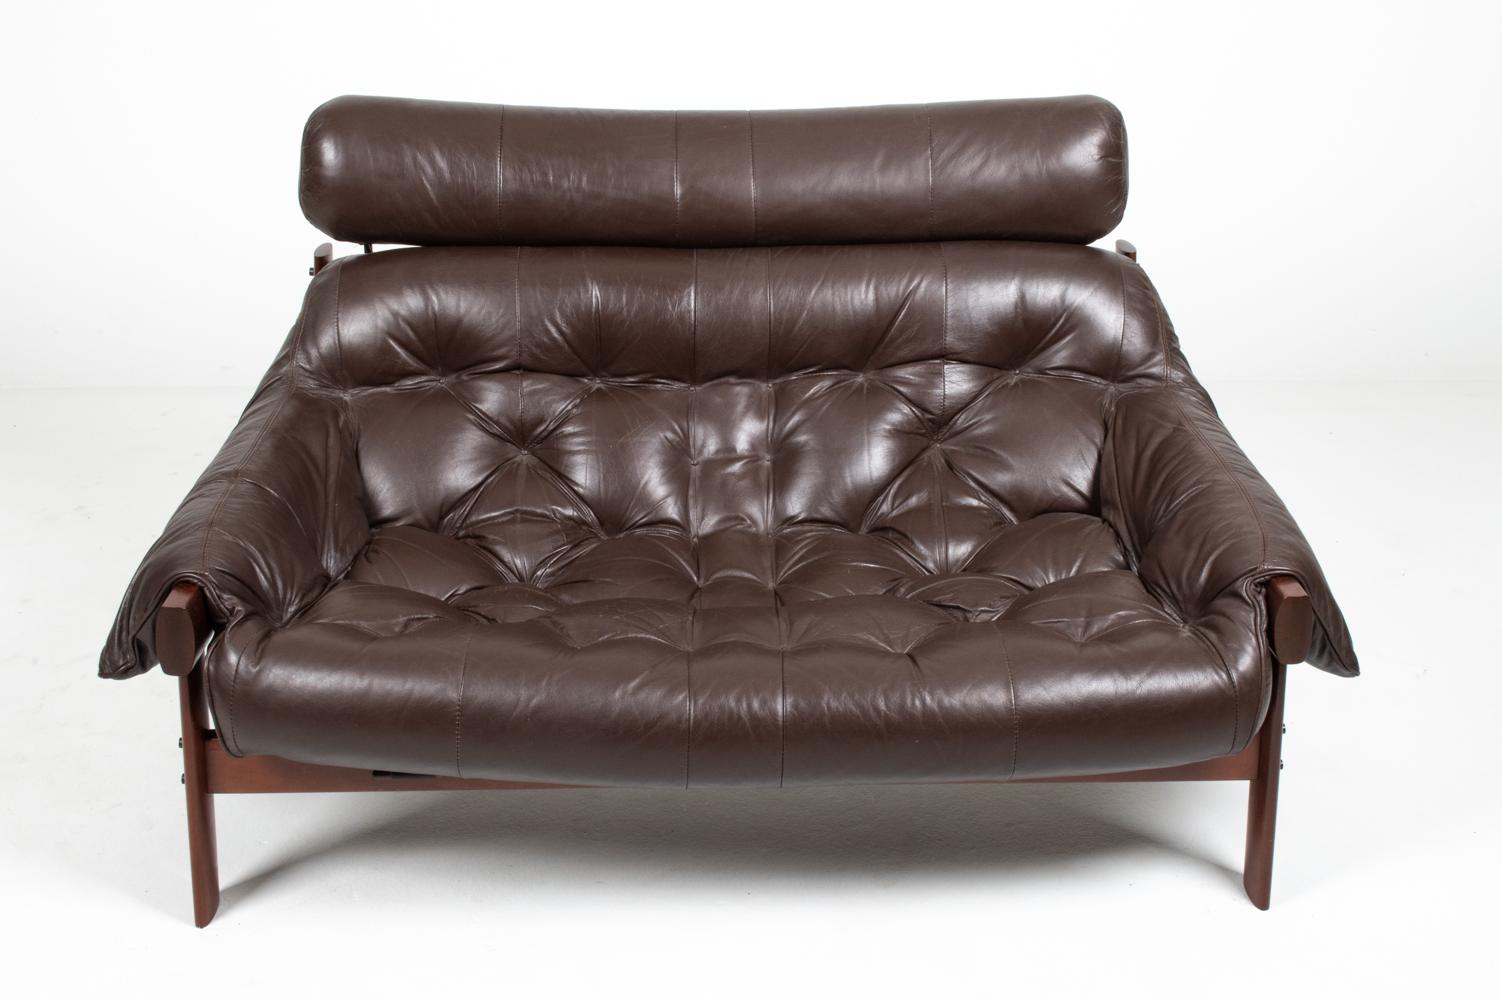 Exotic and luxurious, this stunning seating suite by Percival Lafer features frames of solid Brazilian Pau Ferro wood and slung cushions finished in the finest chocolate brown leather. All three pieces are from the iconic MP-41 series and feature